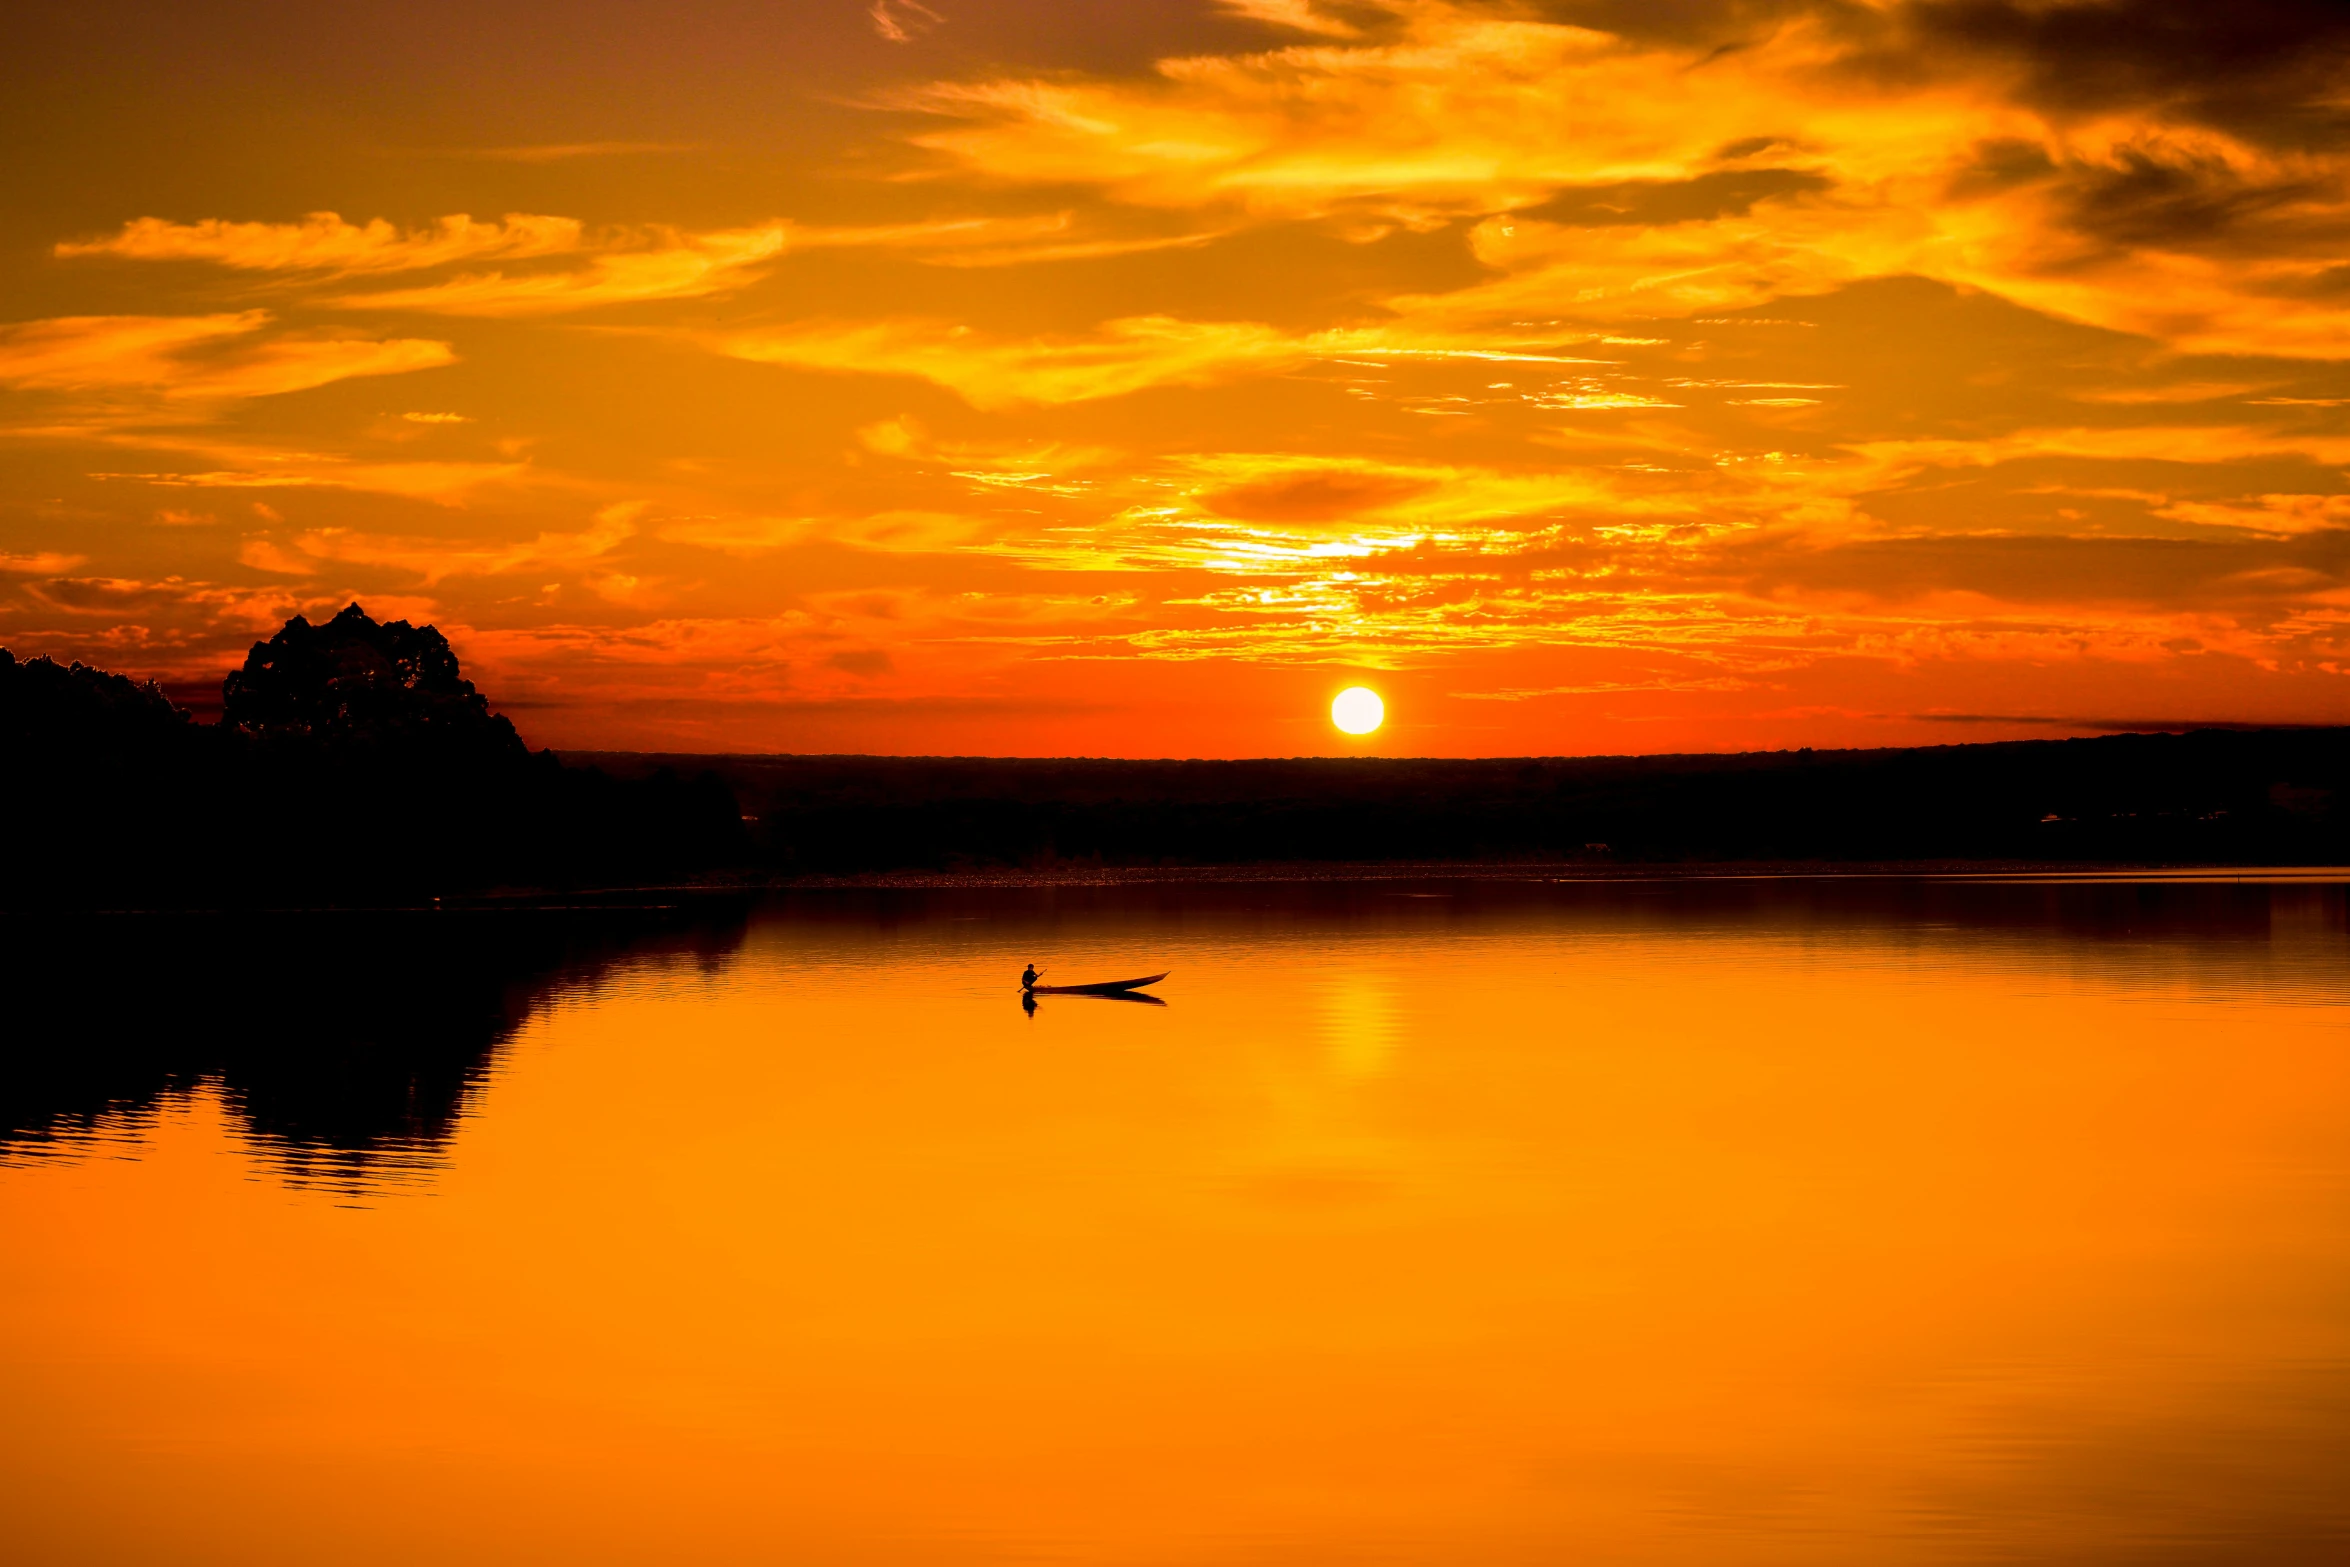 a person in a boat on a lake at sunset, pexels contest winner, minimalism, bright yellow and red sun, duck, slide show, golden clouds